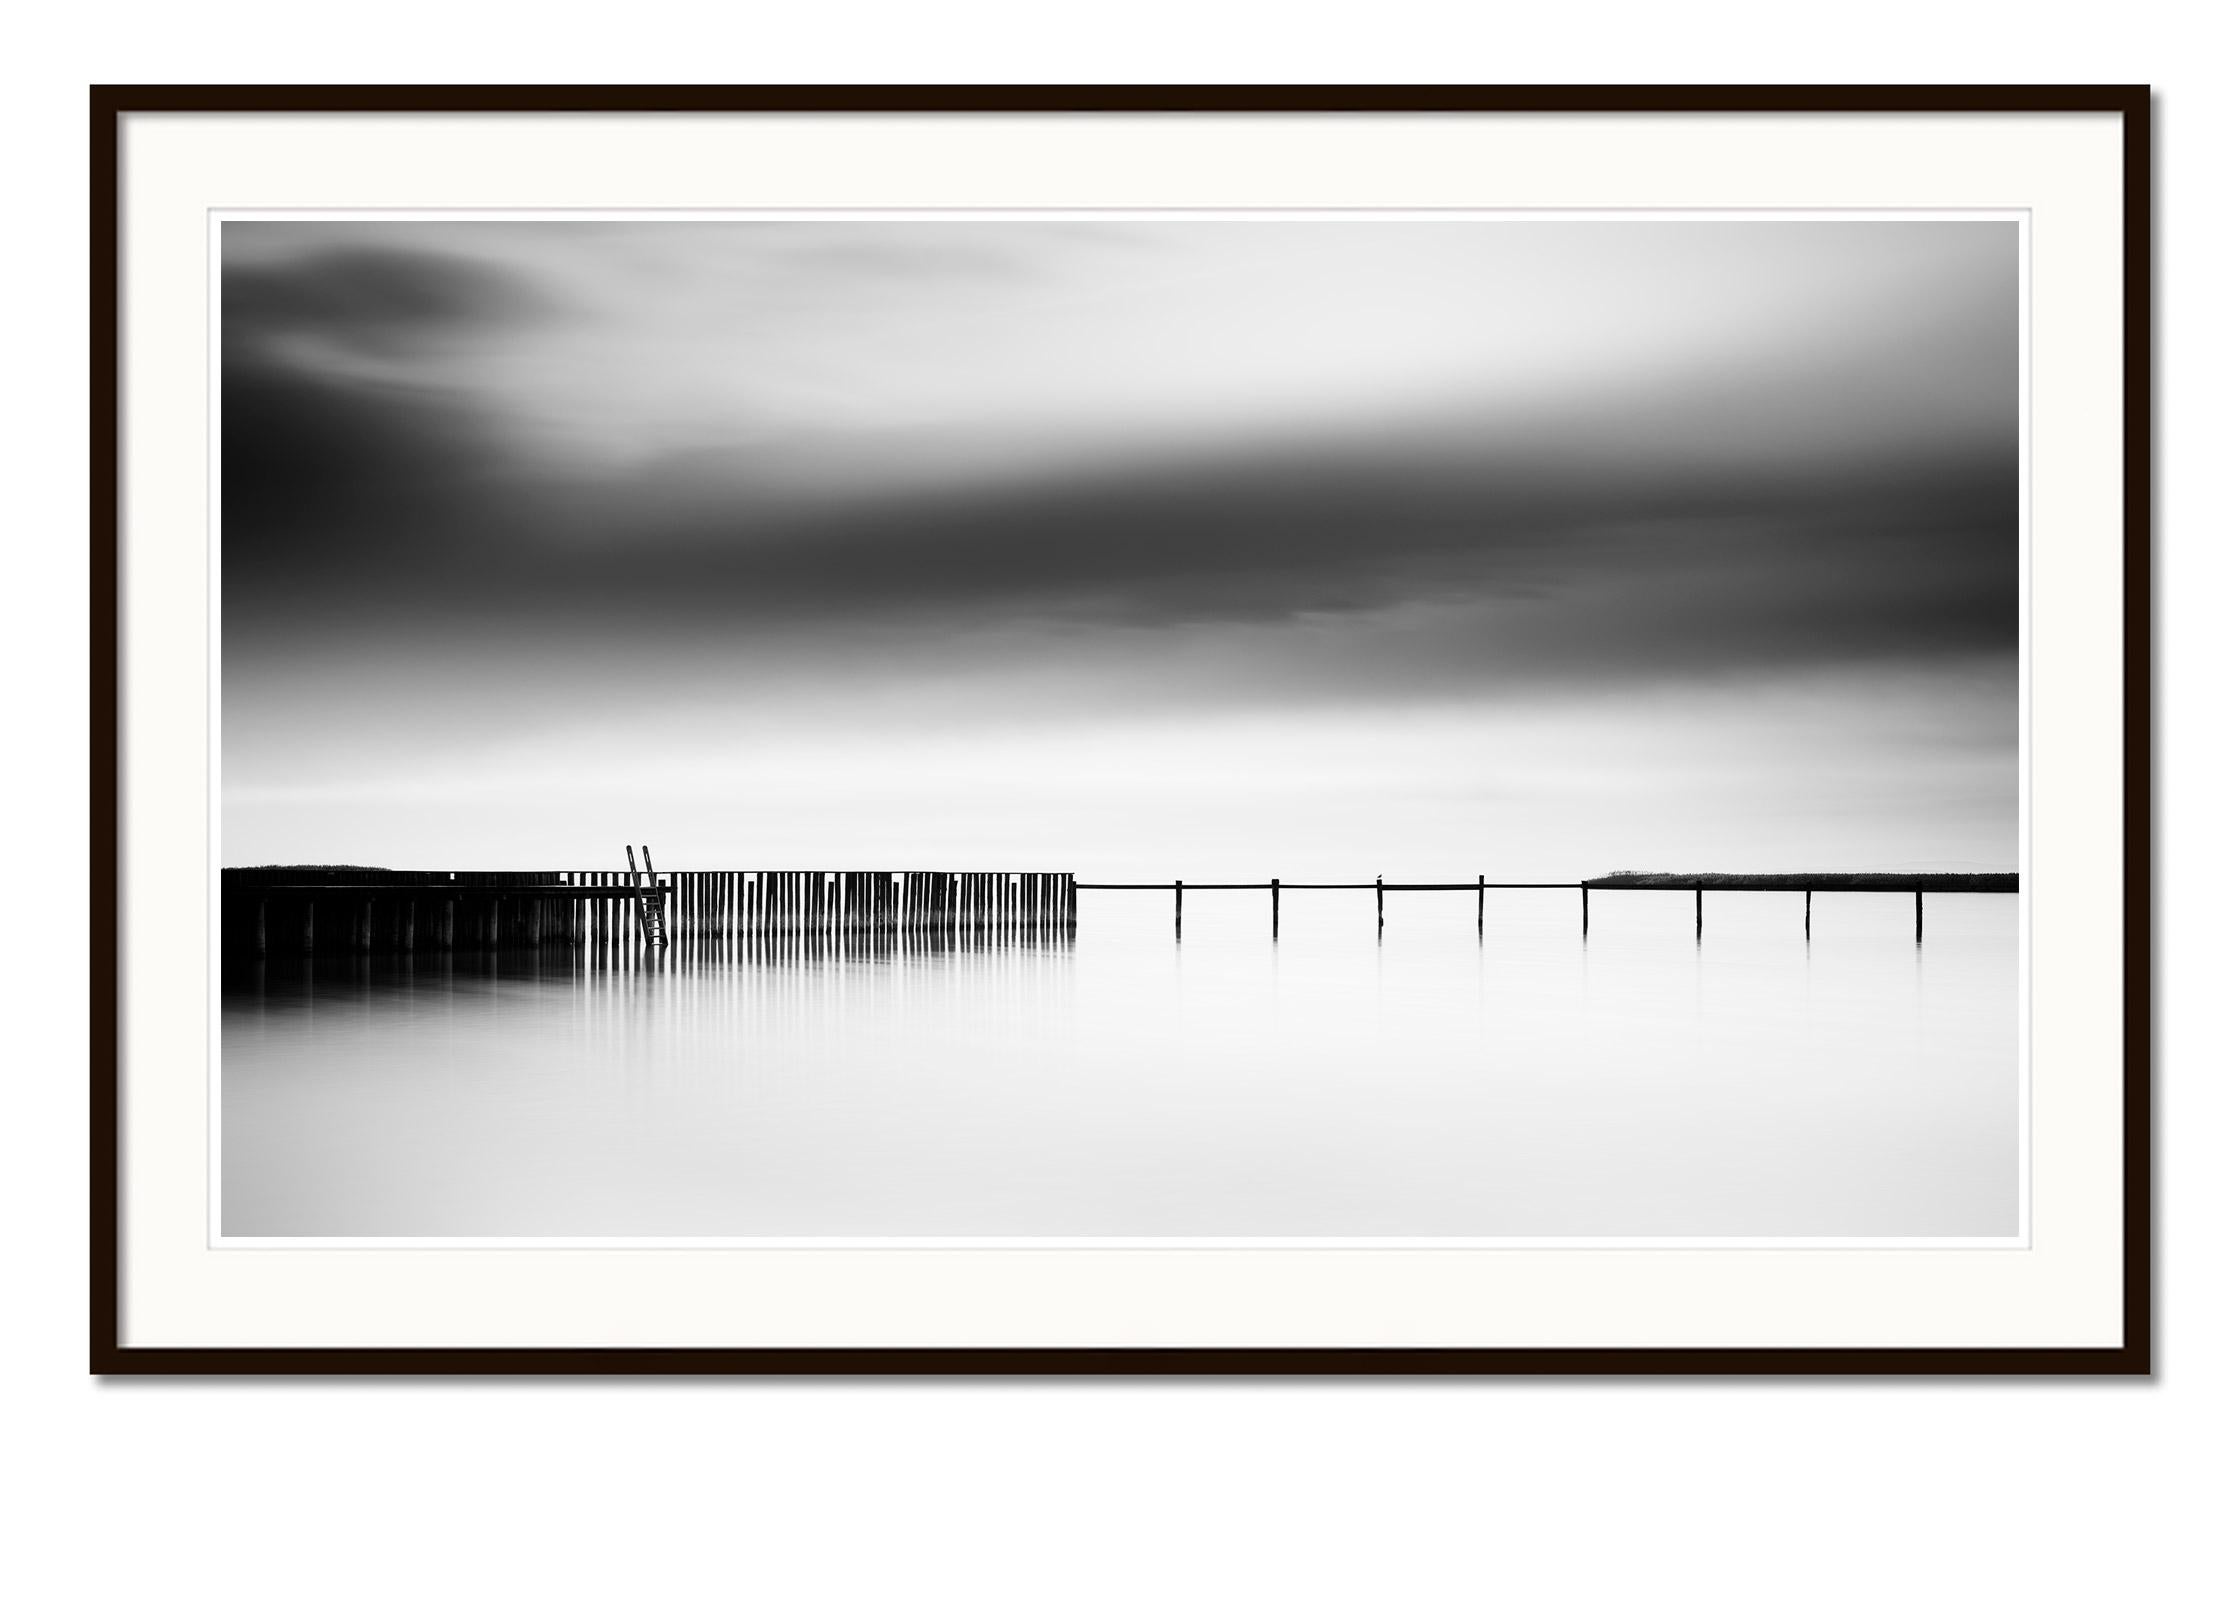 Black and White Fine Art Panorama Landscape. Archival pigment ink print, edition of 7. Signed, titled, dated and numbered by artist. Certificate of authenticity included. Printed with 4cm white border.
International award winner photographer -